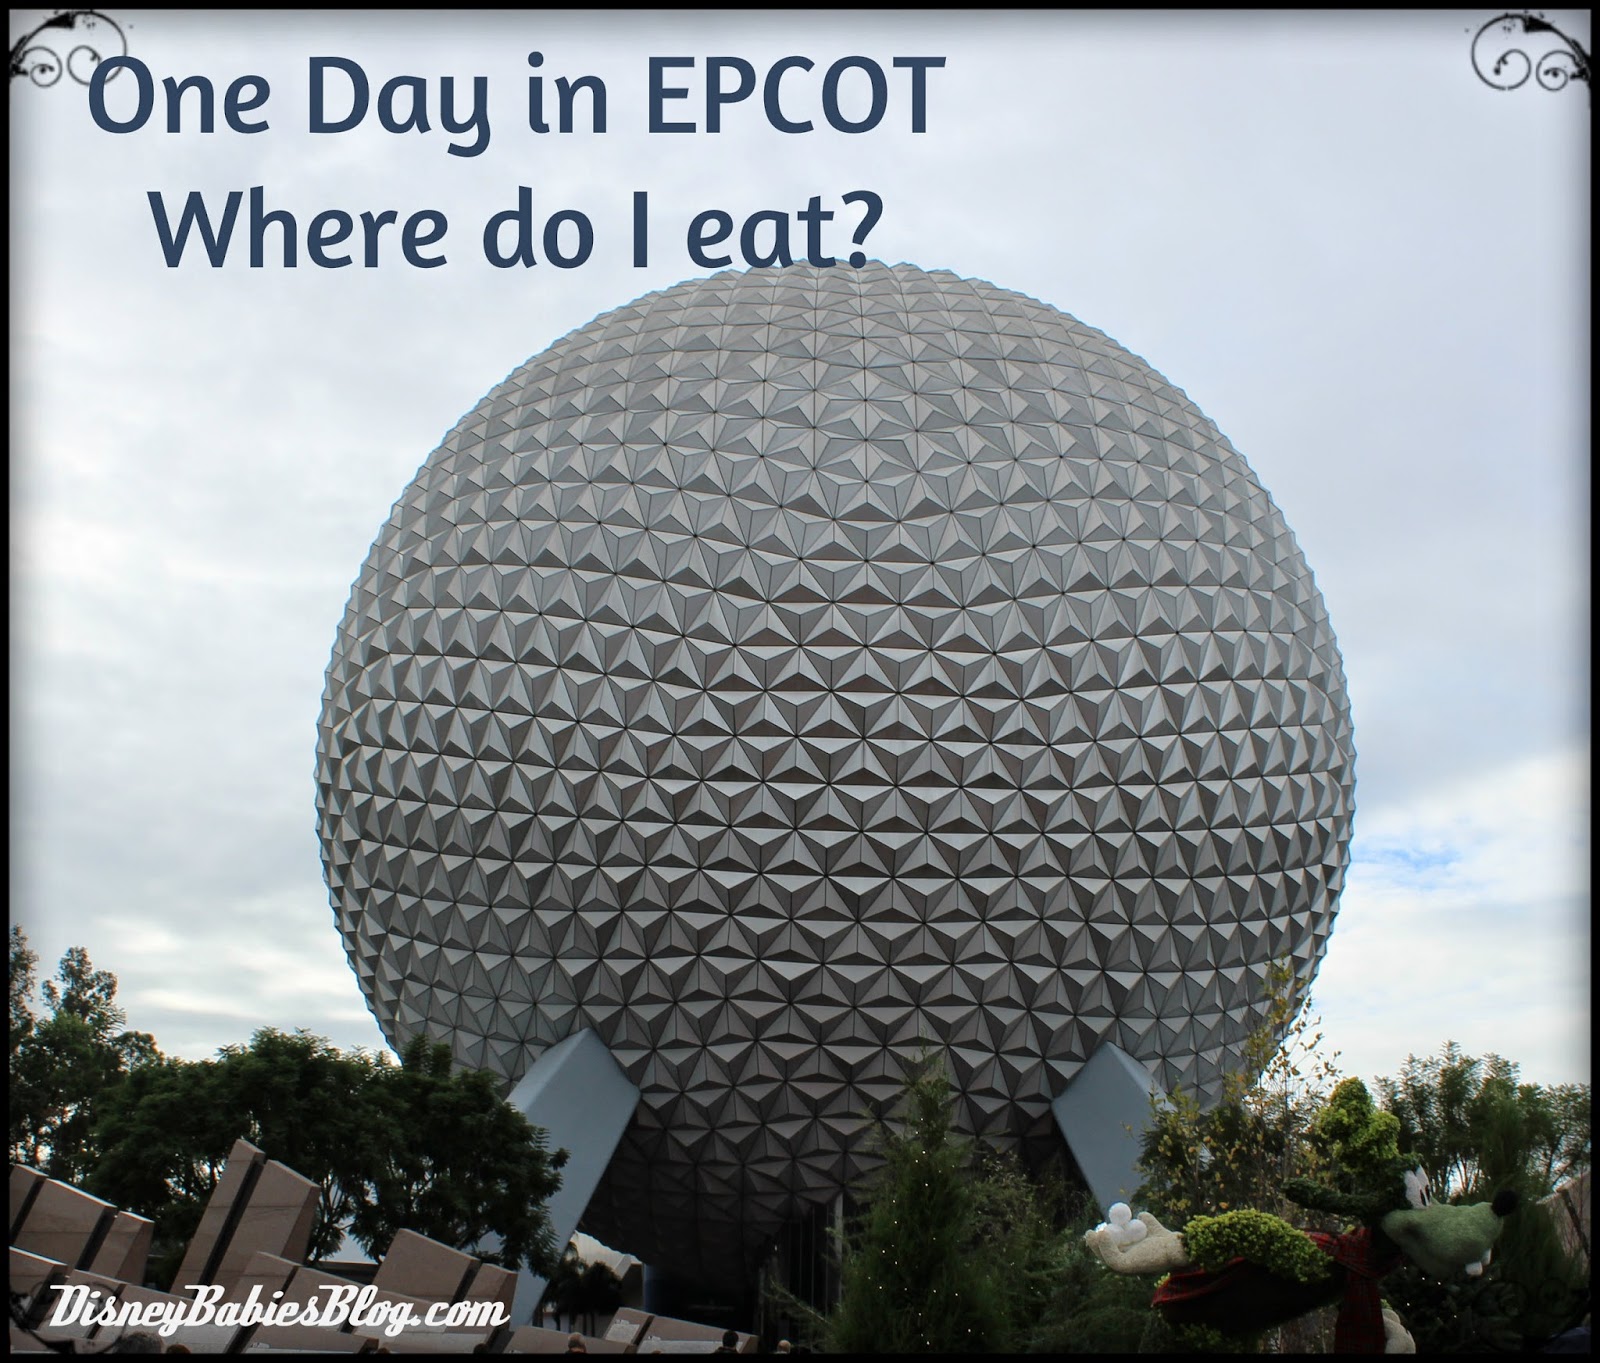 Disney Babies Blog: One Day of Food in Epcot